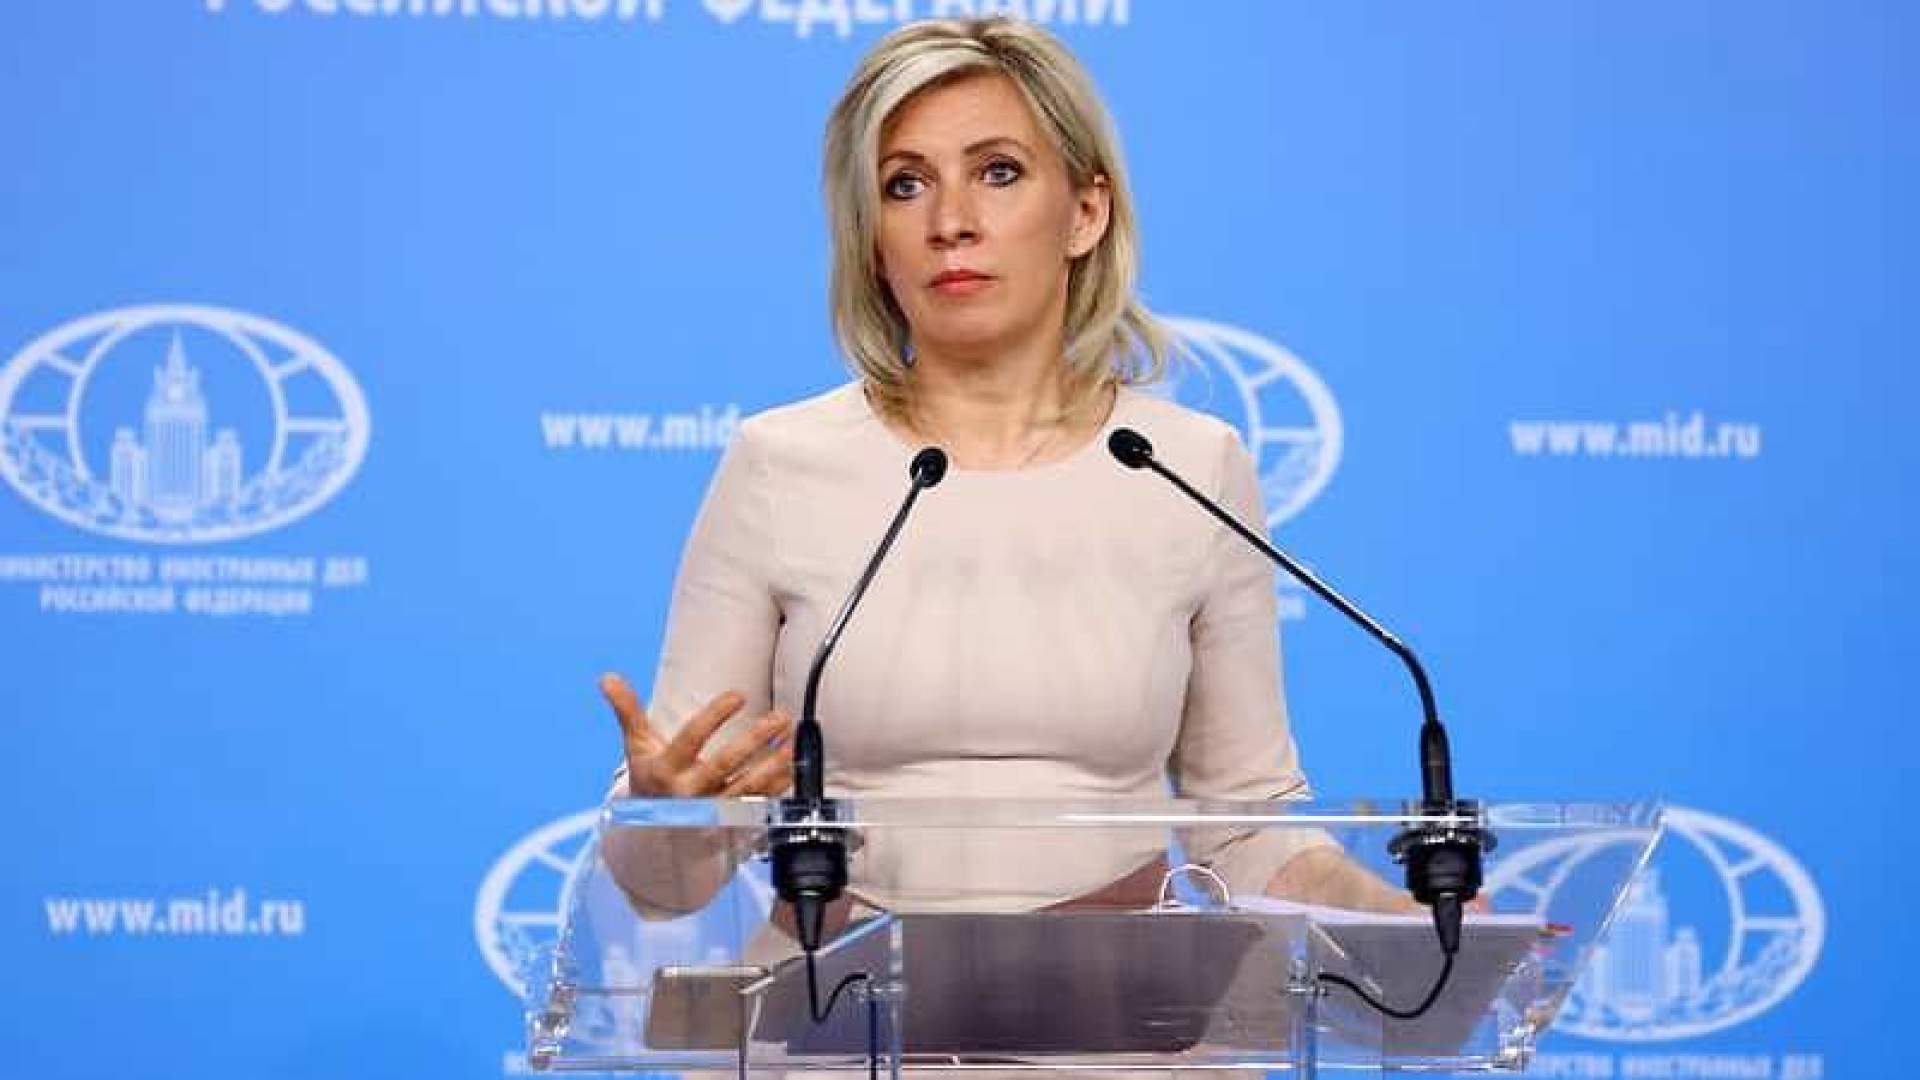 Maria Zakharova: "Russia believes in the objectivity and impartiality of the IAEA mission"